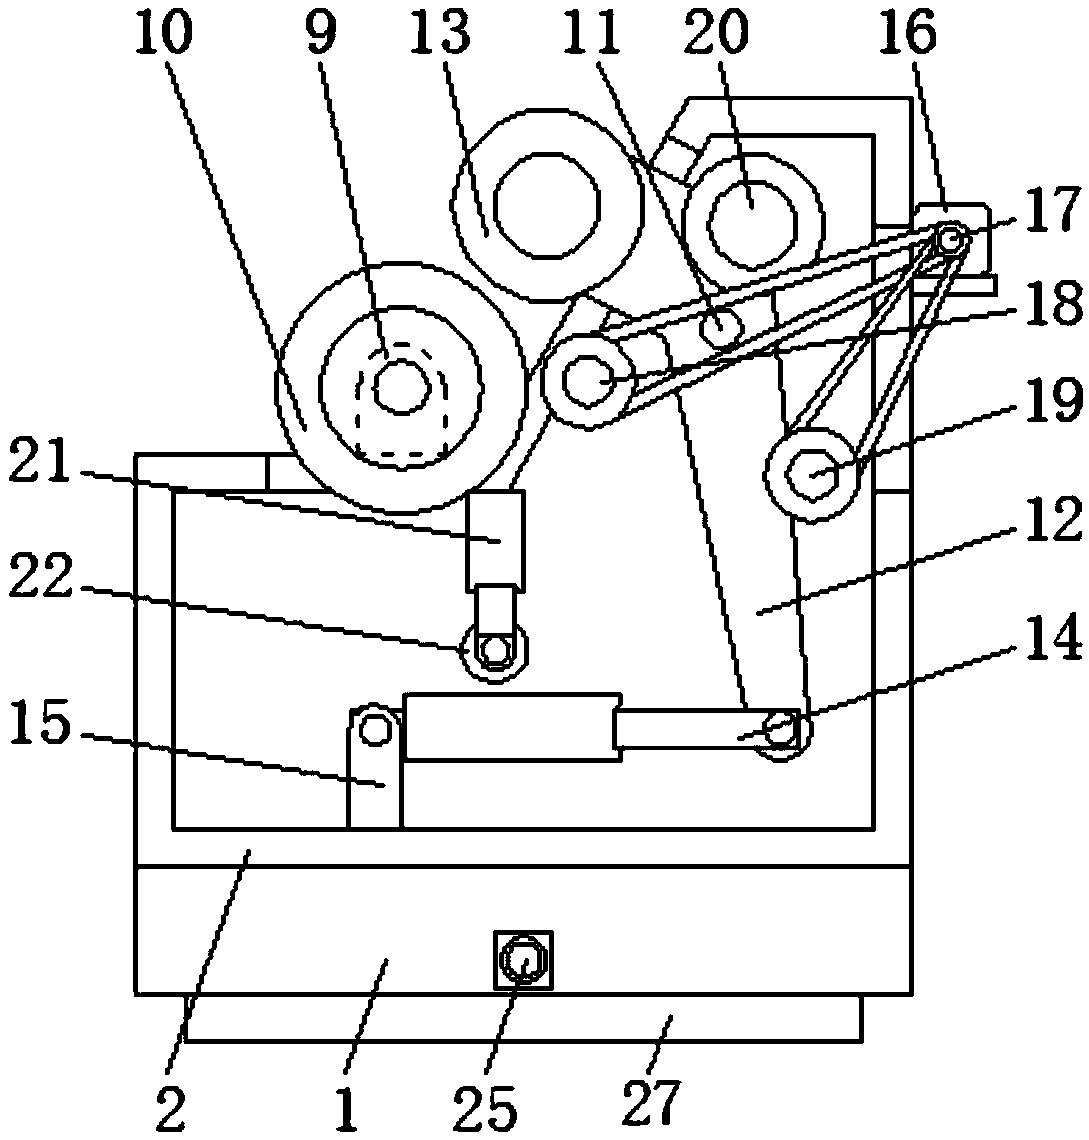 Printing and dyeing device for textile processing with function of wide application range